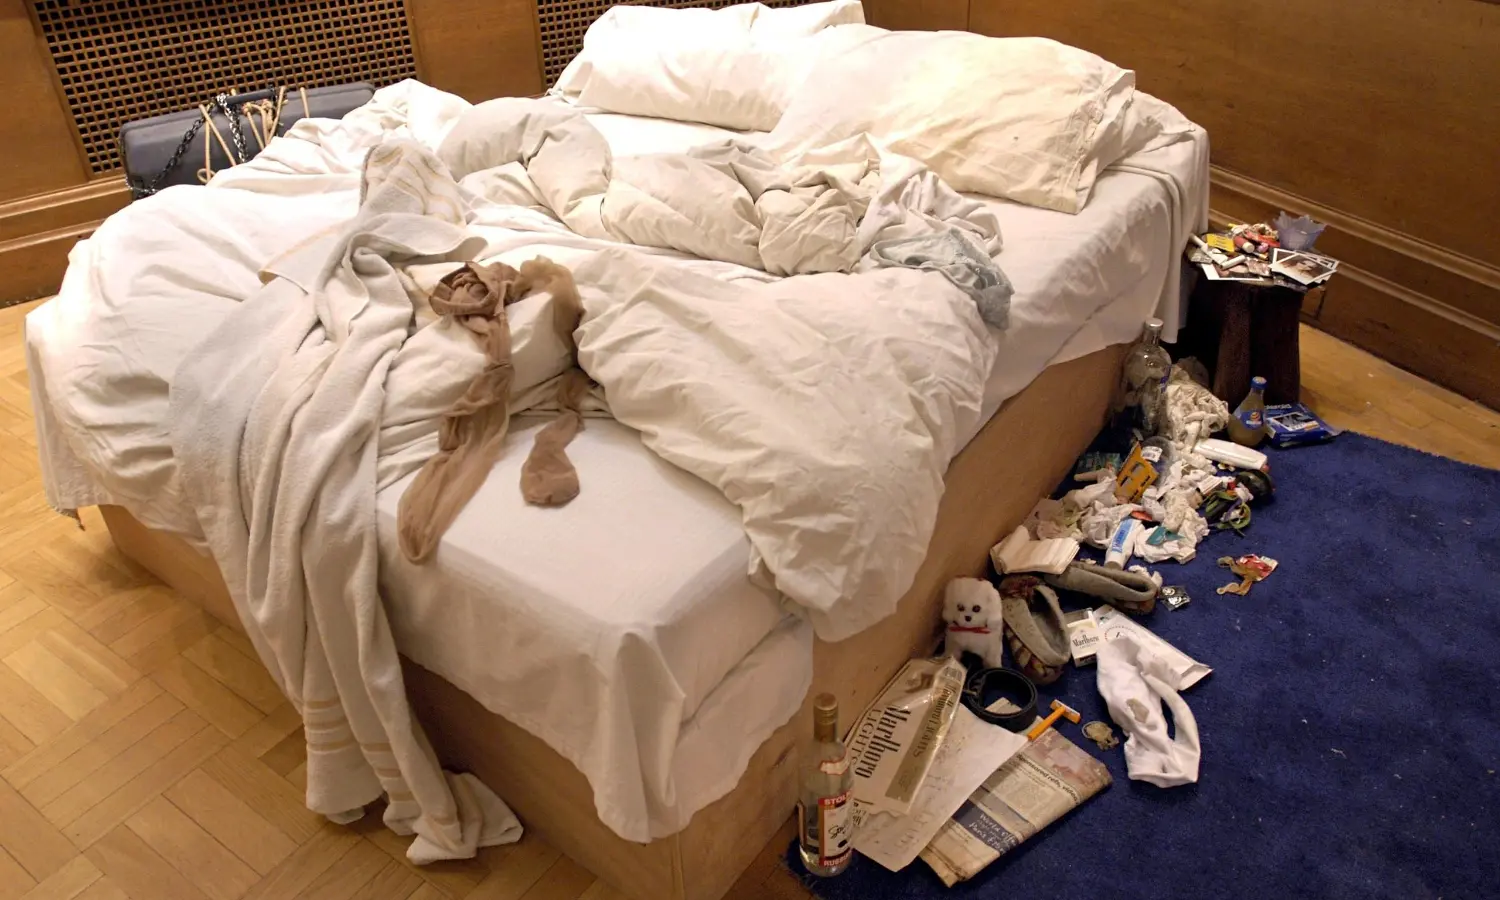 Tracey Emin's My Bed (source: theguardian)